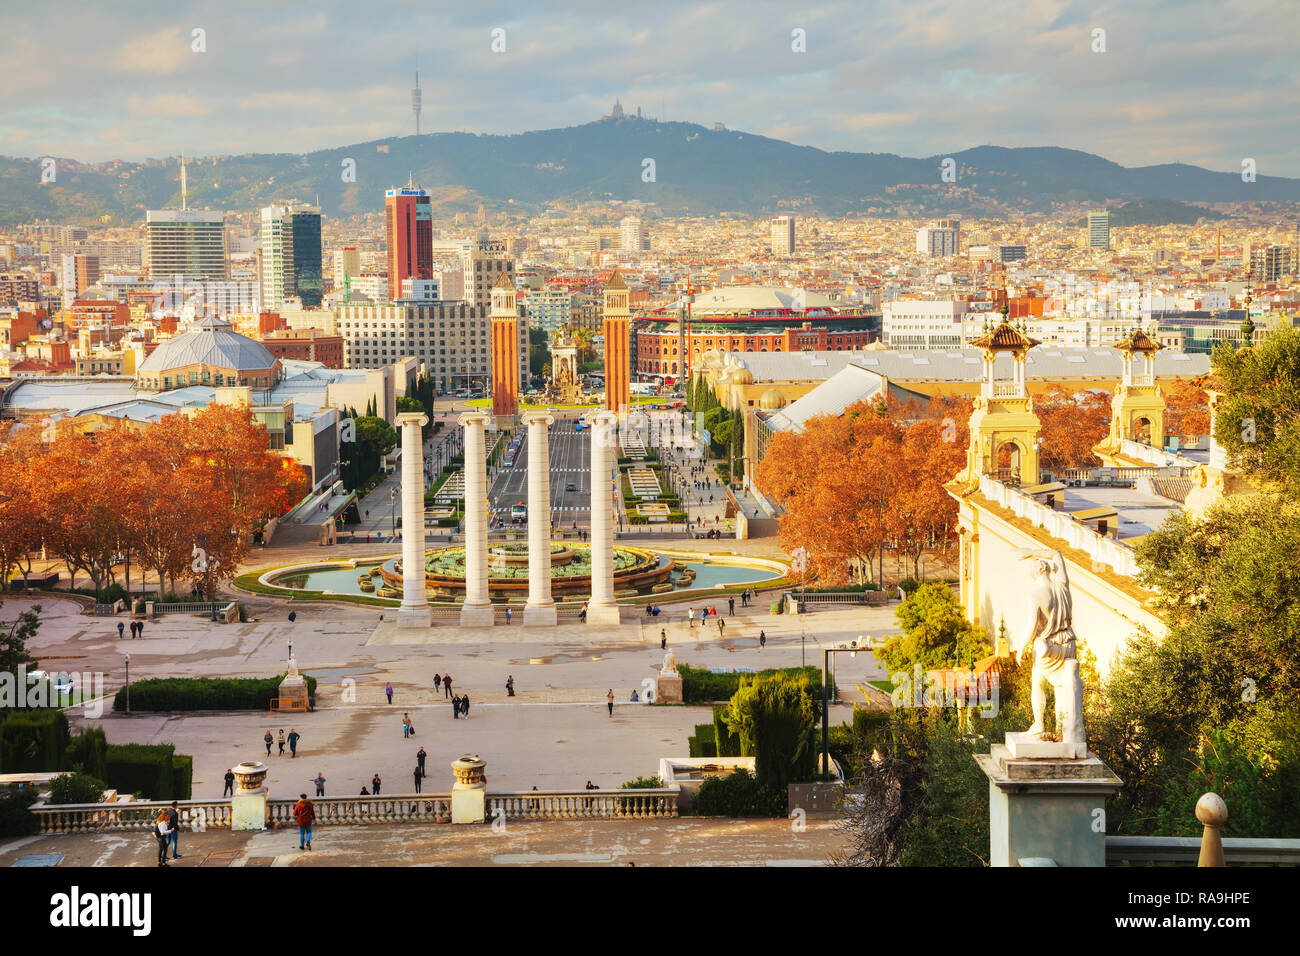 BARCELONA - DECEMBER 14: Overview of the city from the Montjuic hill on December 14, 2018 in Barcelona, Spain. Stock Photo